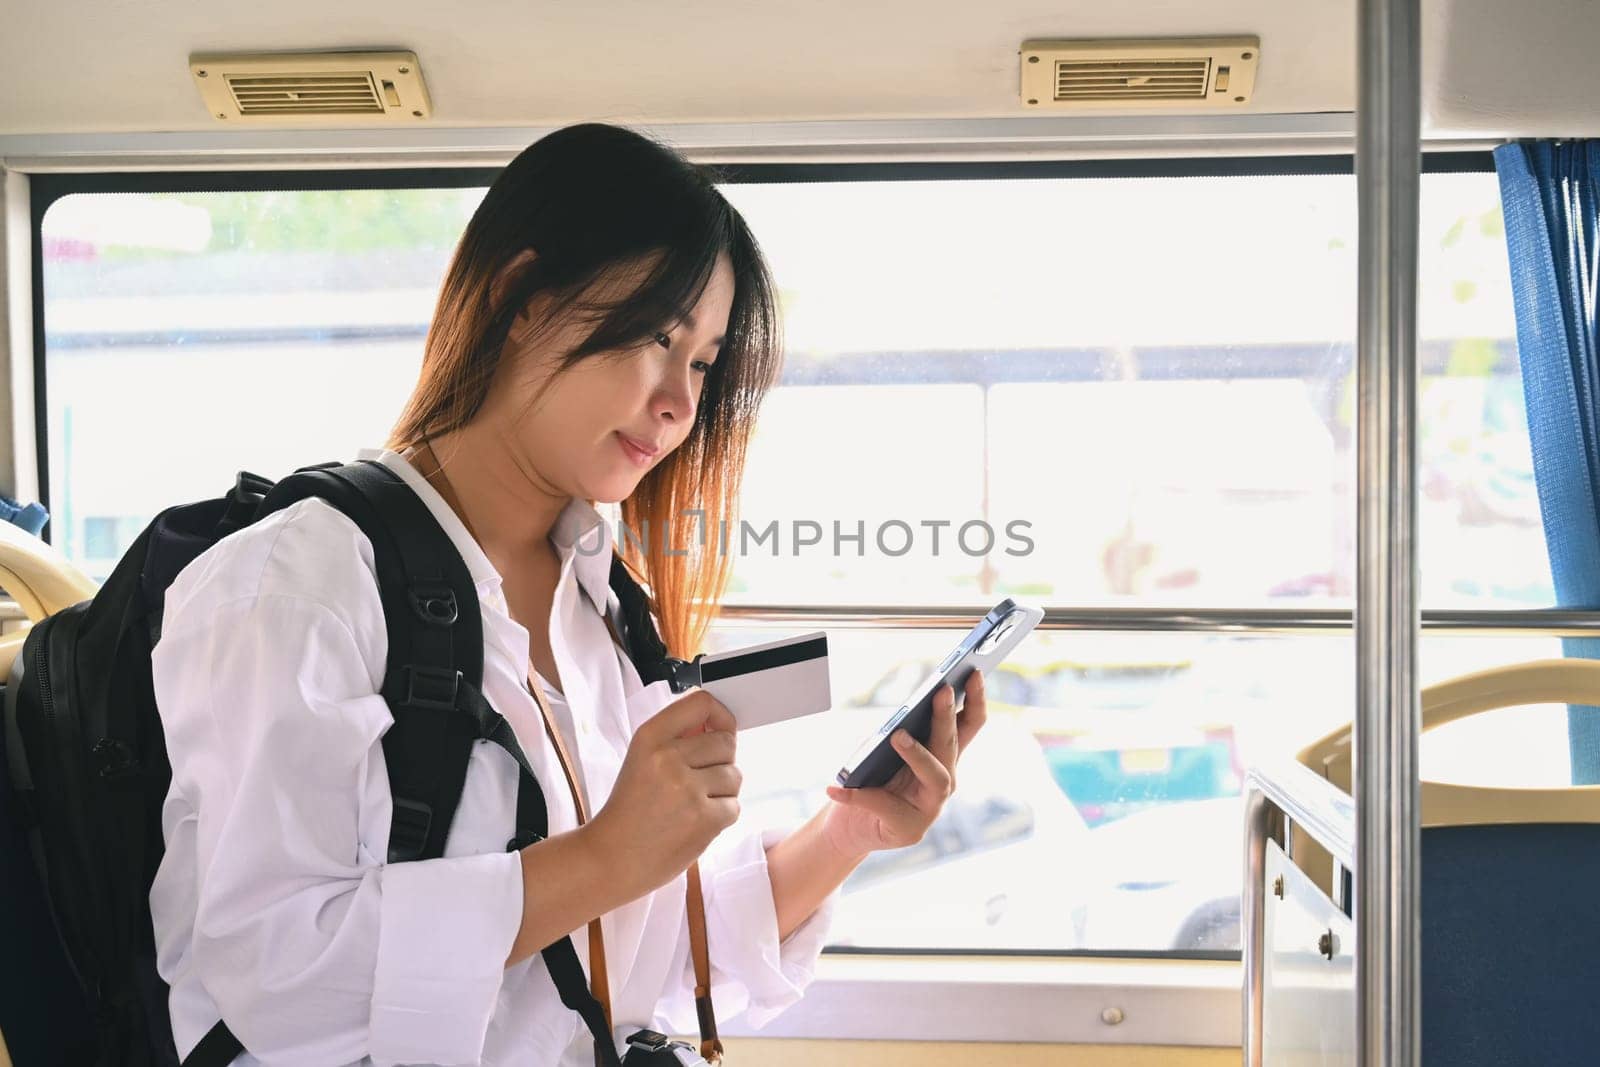 Smiling young woman passenger holding credit card and using mobile phone while traveling by bus.